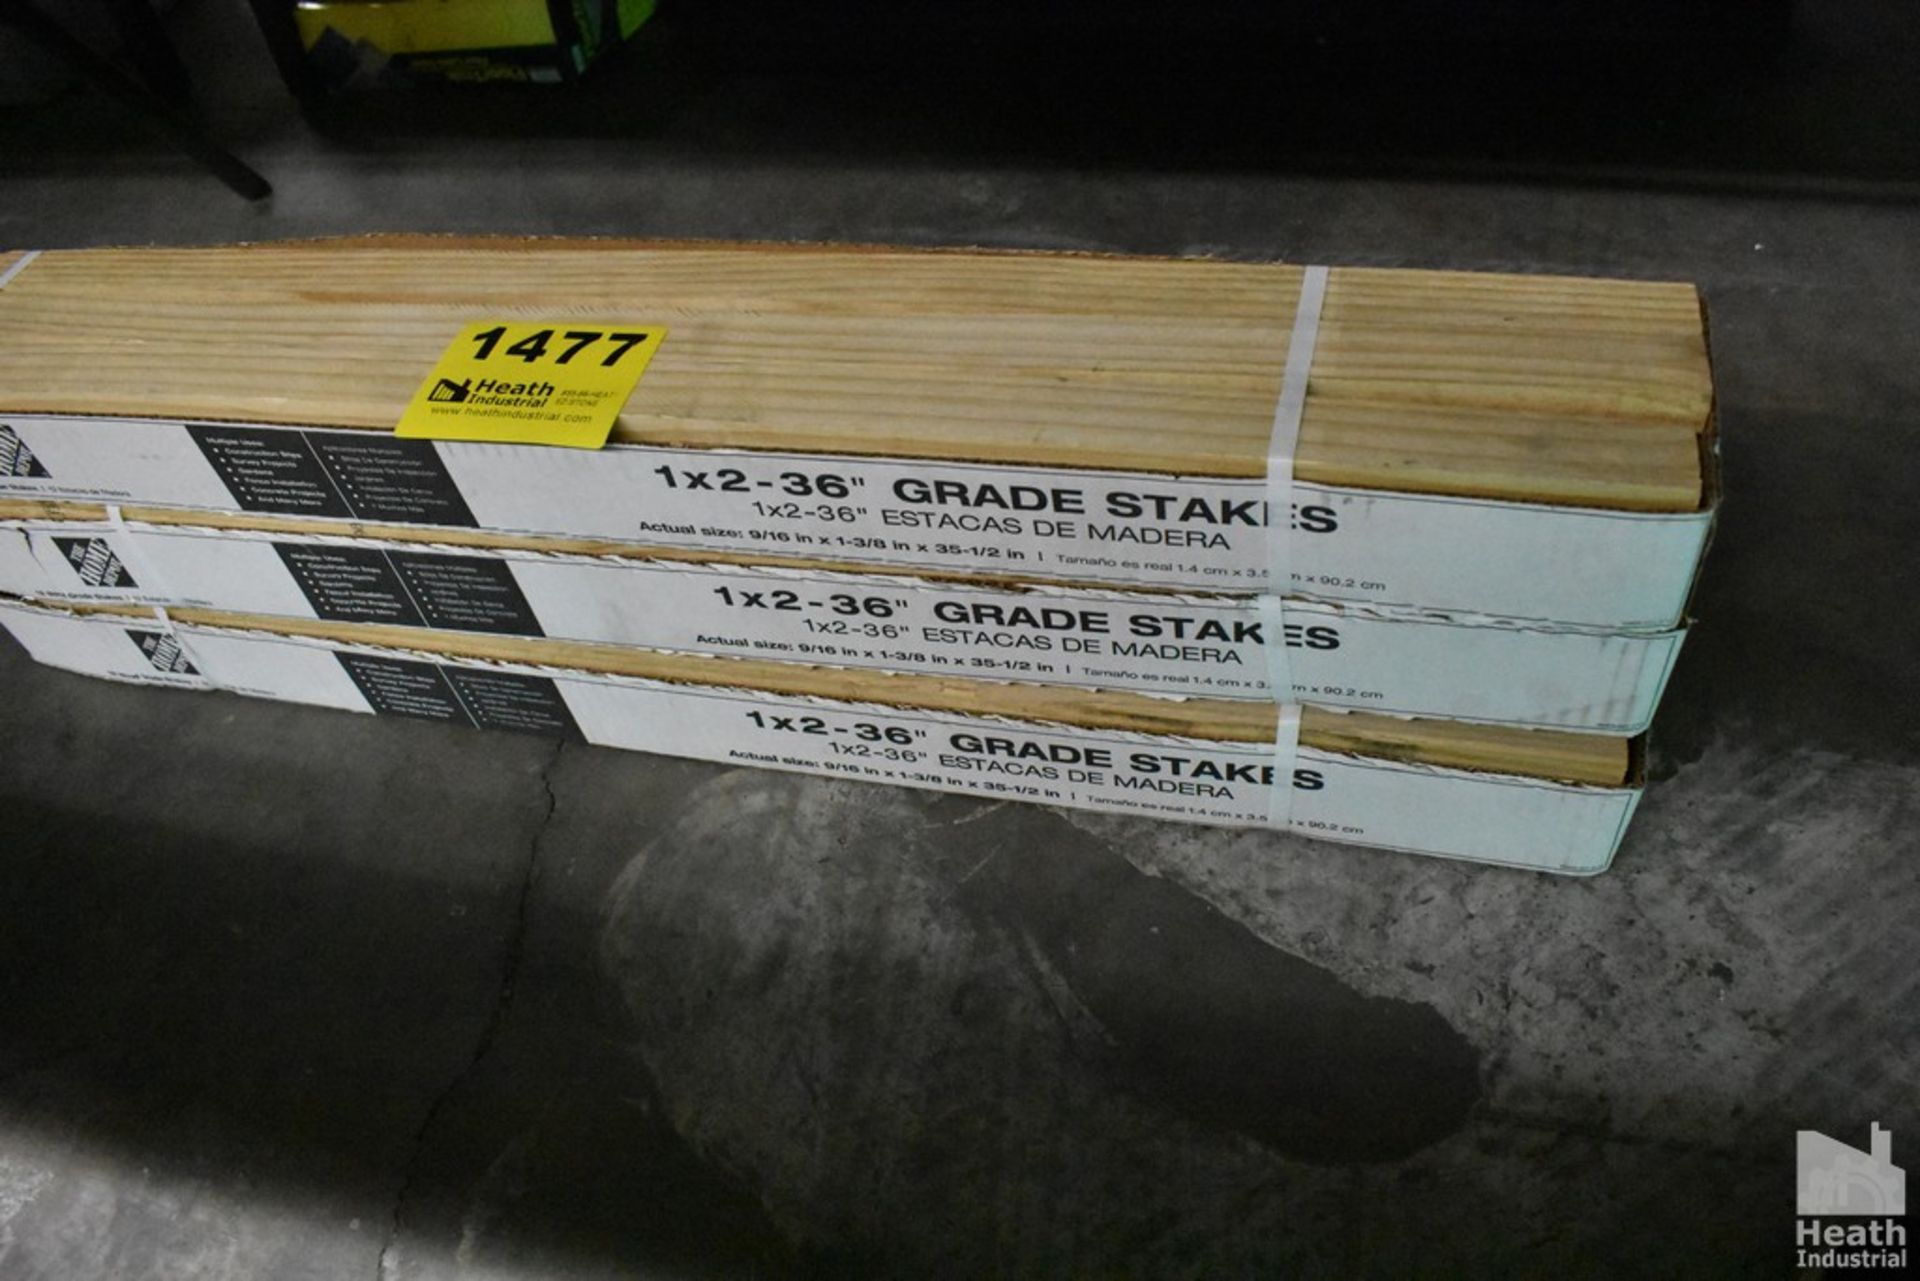 HOME DEPOT 1" X 2" X 36" GRADE STAKES - Image 2 of 2